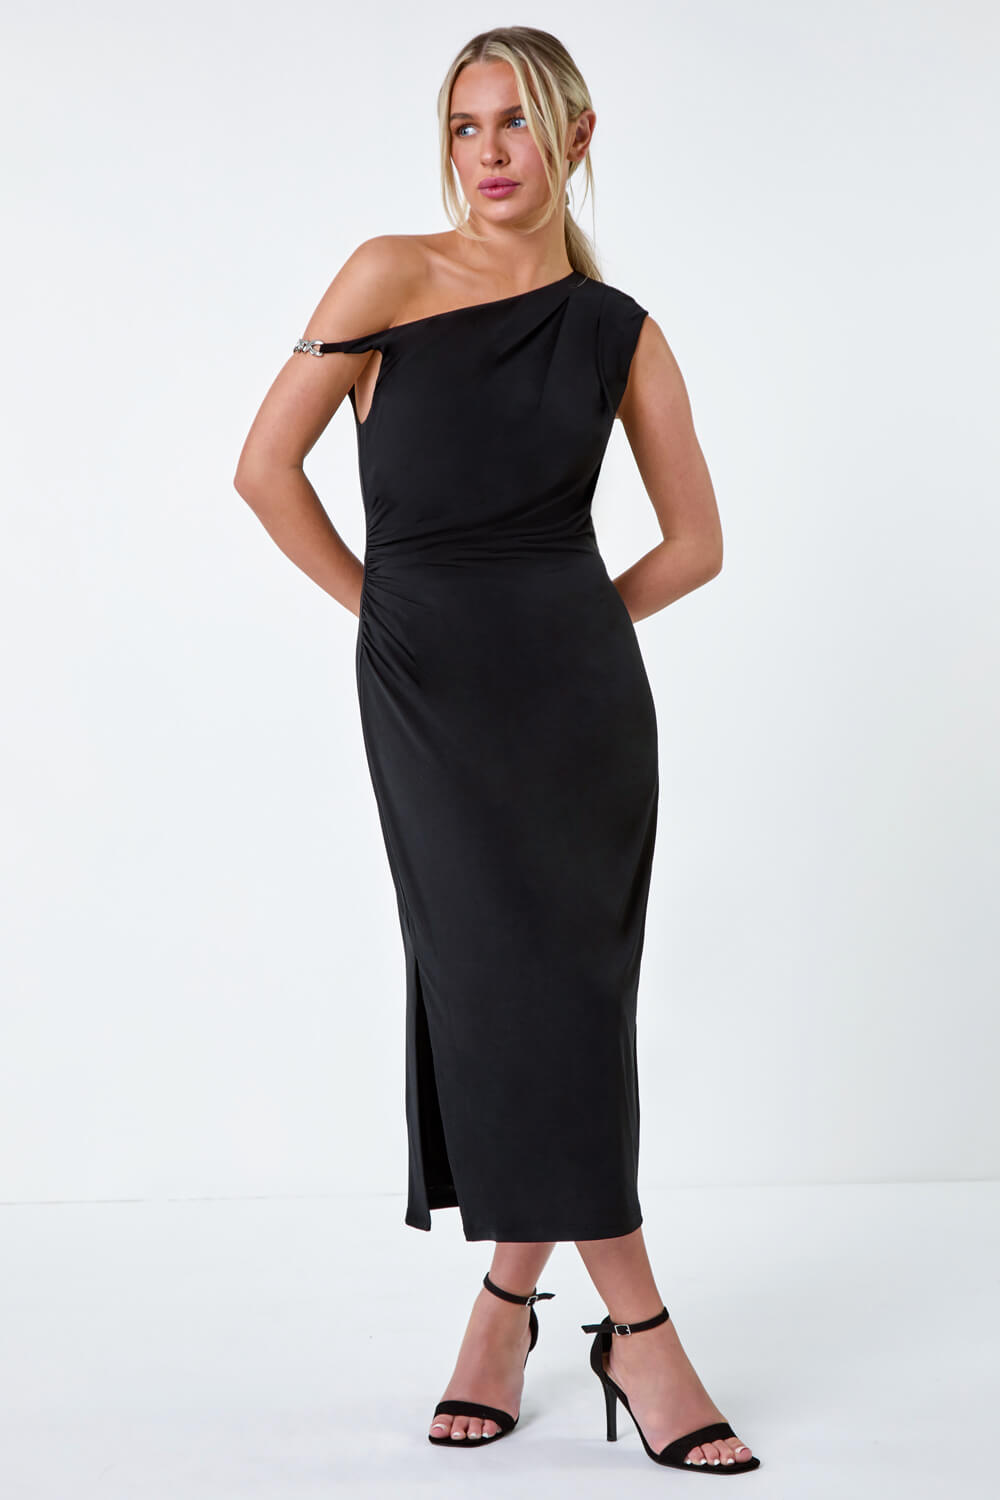 Black Petite Twist Detail Ruched Stretch Dress, Image 2 of 5